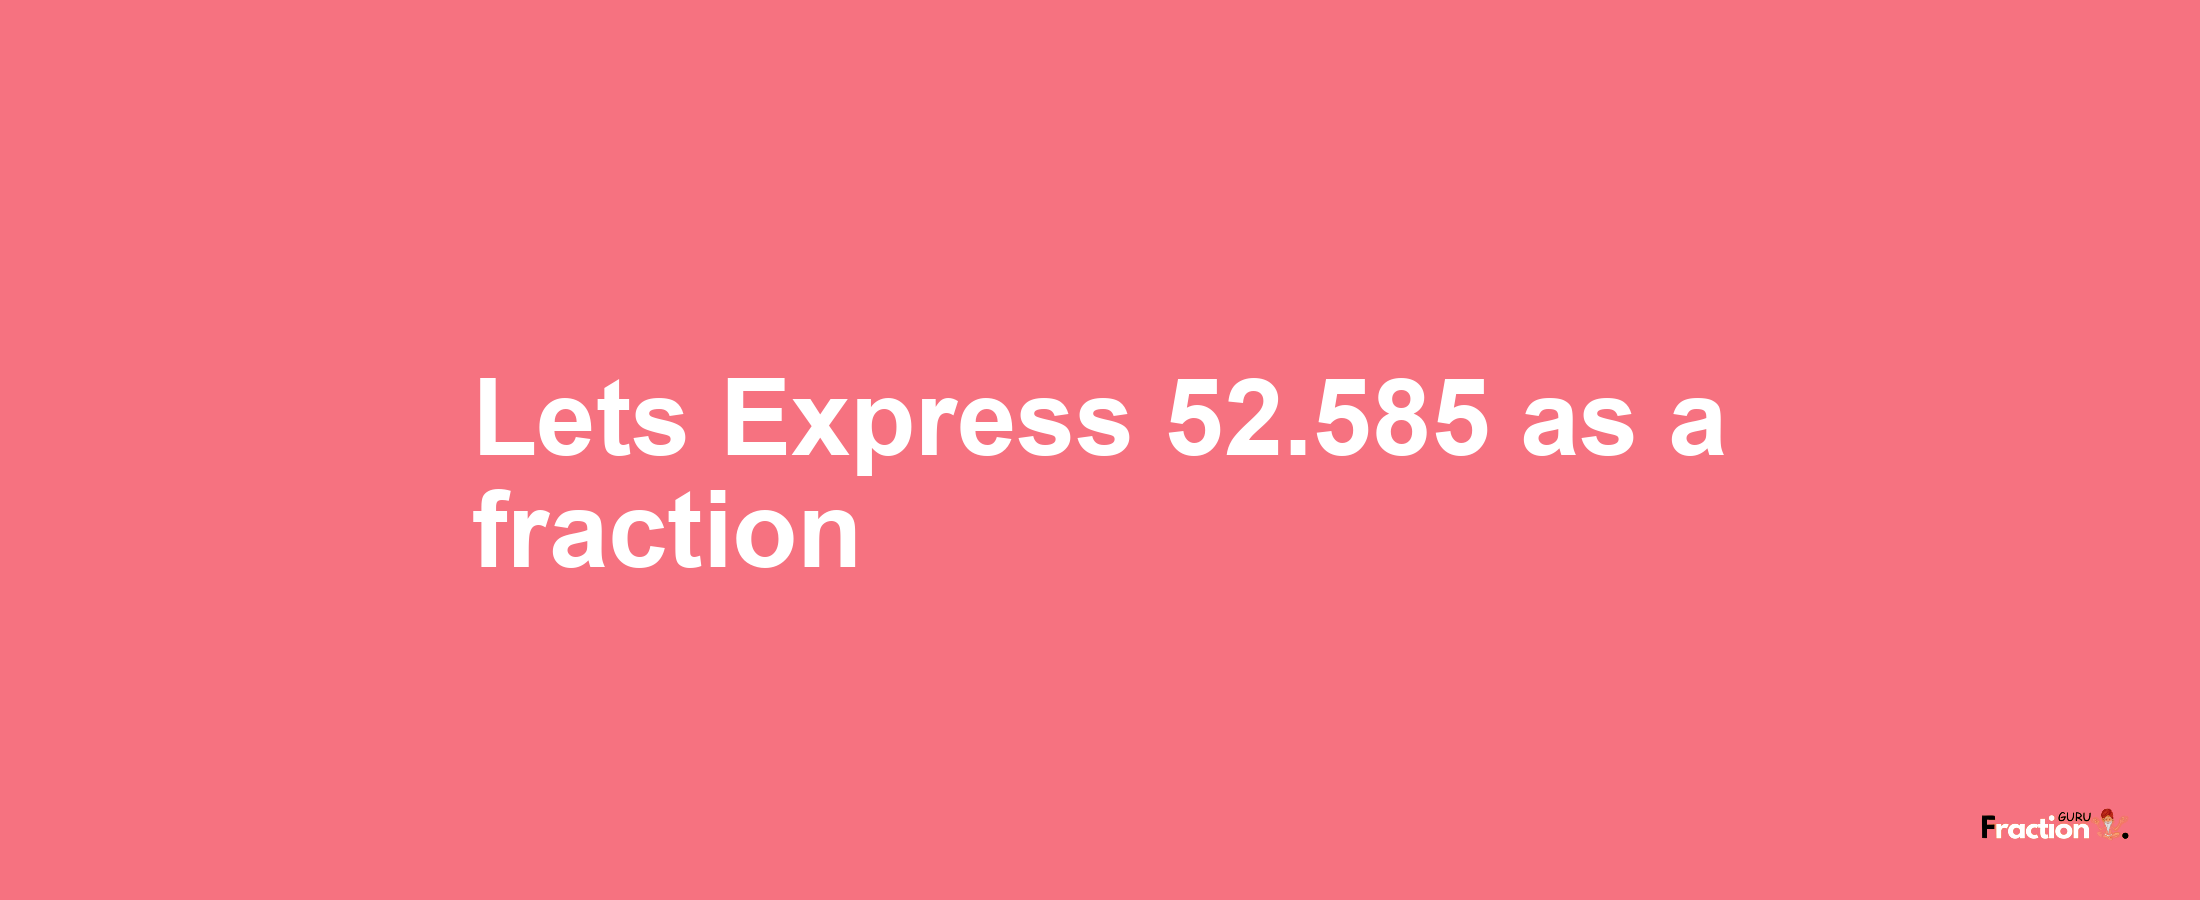 Lets Express 52.585 as afraction